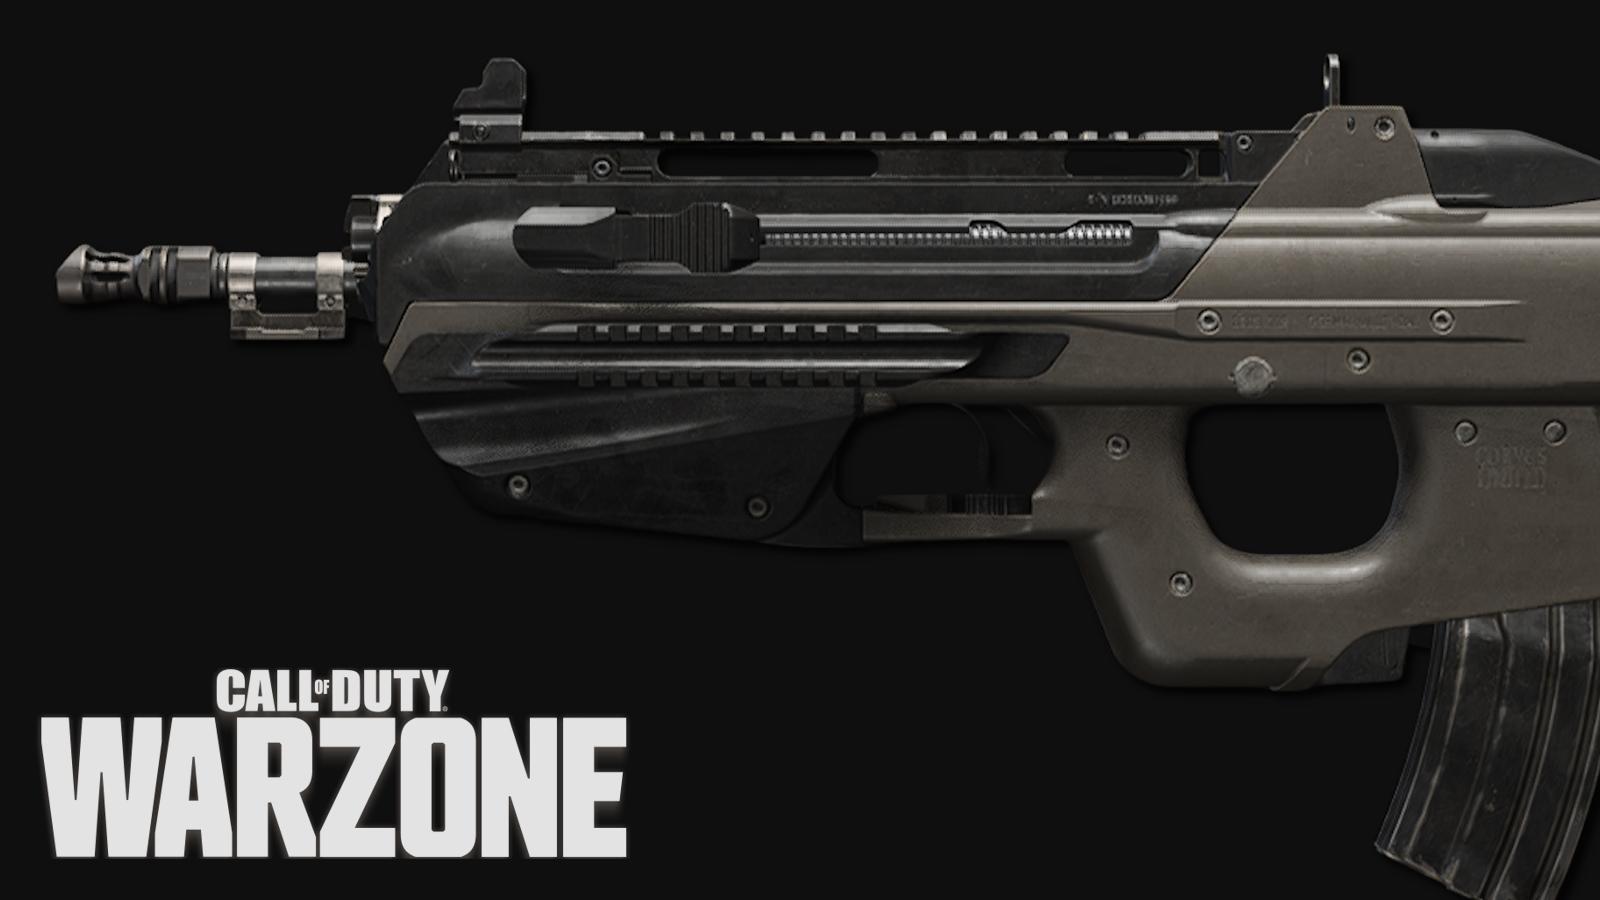 The BP50 assault rifle in Warzone.